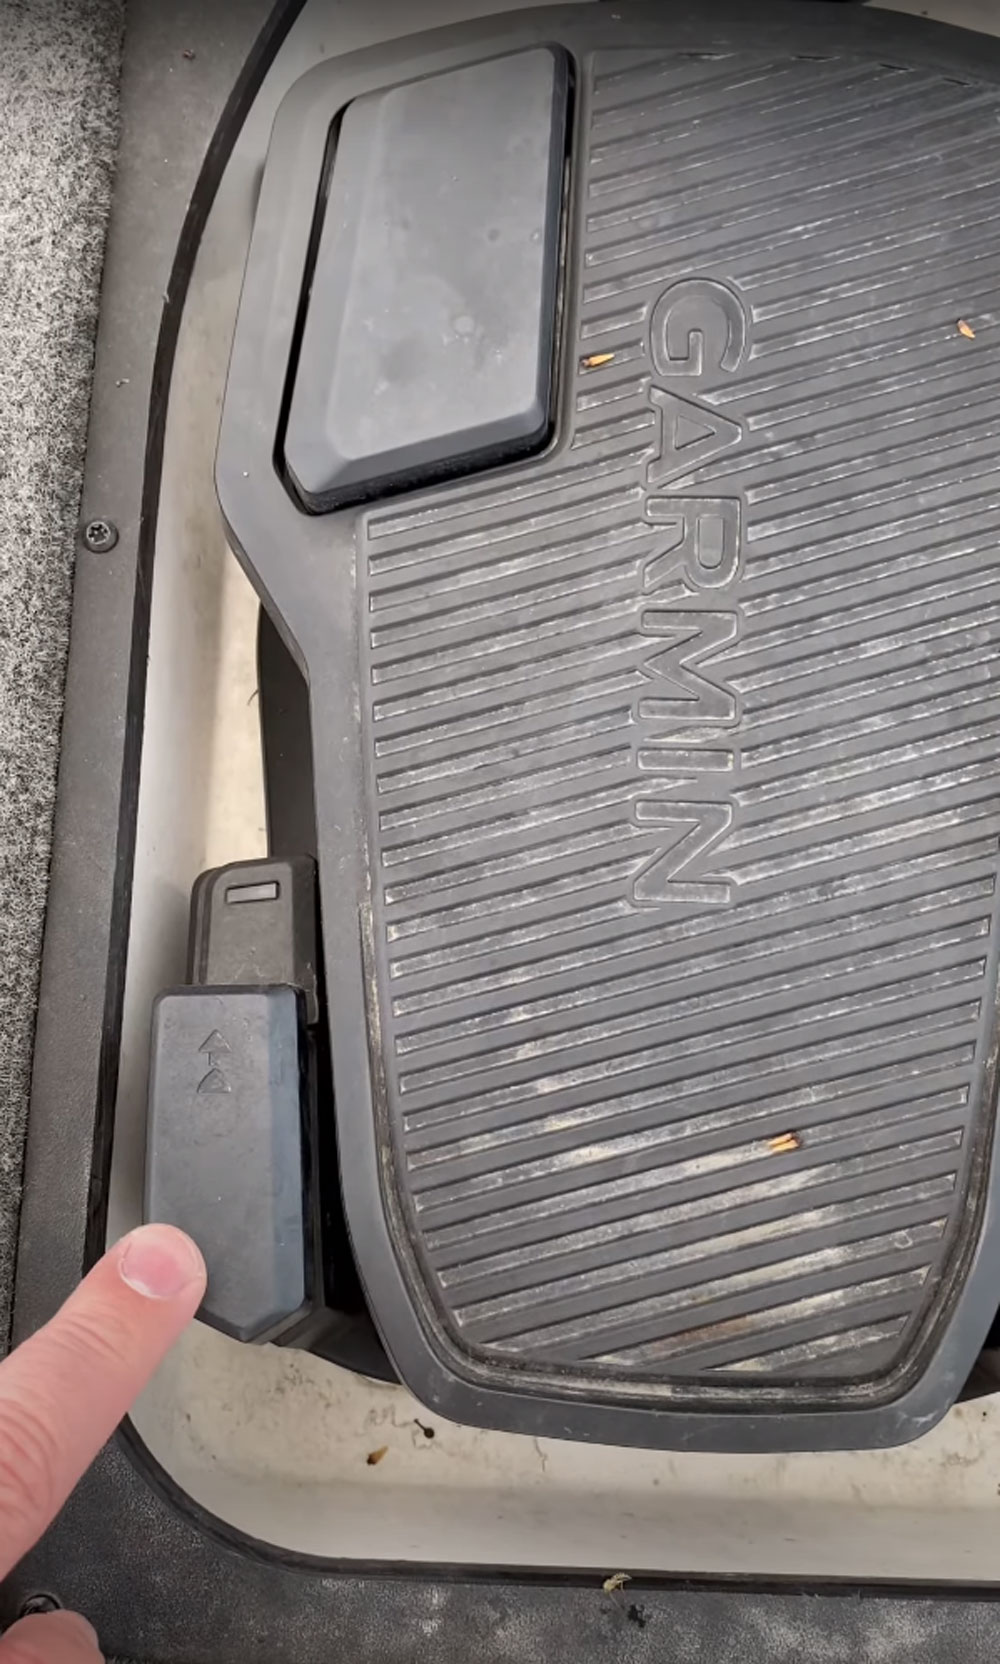 Foot Pedal Malfunction